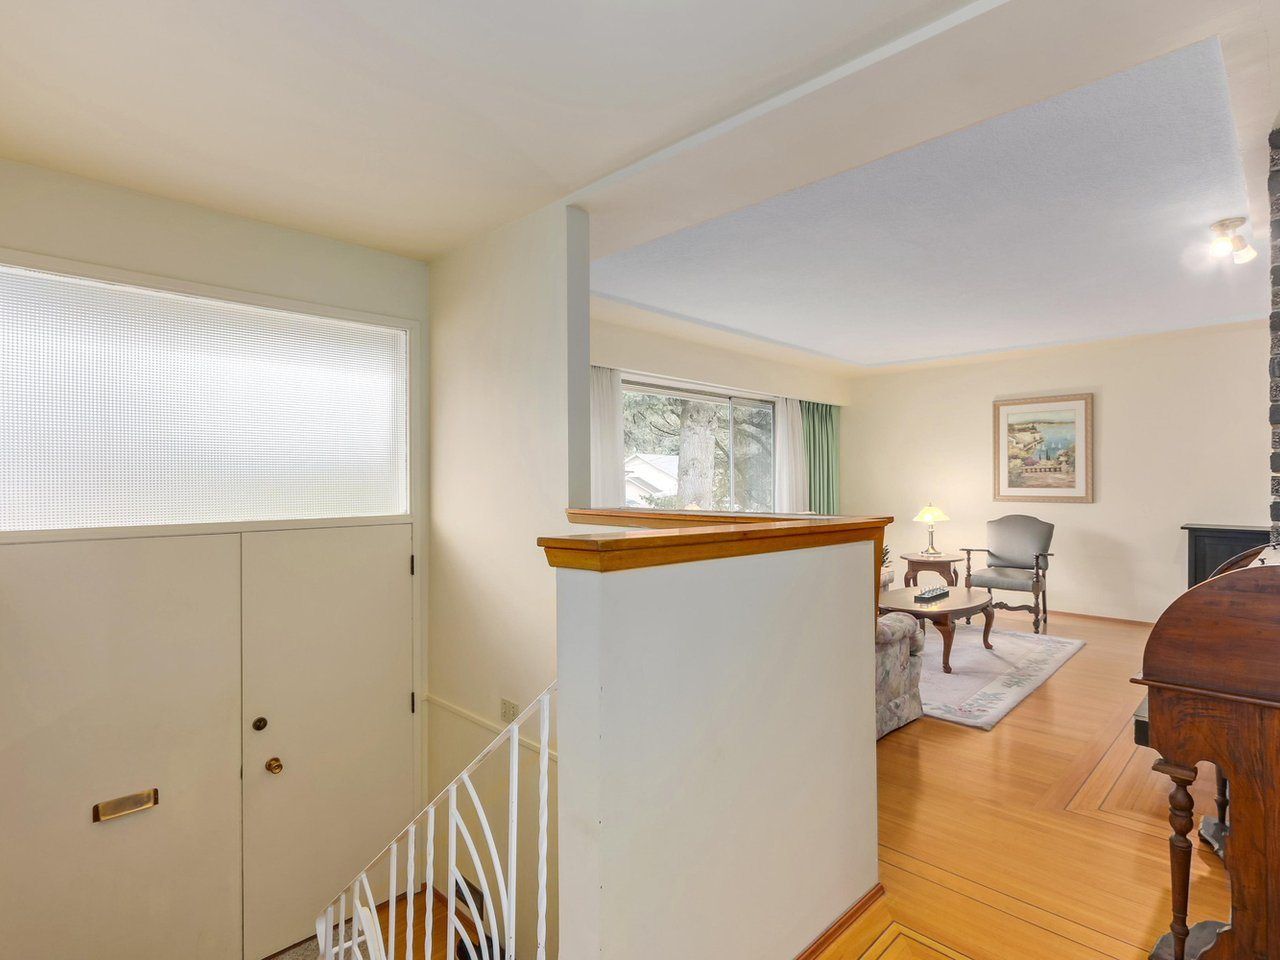 Photo 3: Photos: 1970 ORLAND Drive in Coquitlam: Central Coquitlam House for sale : MLS®# R2330558